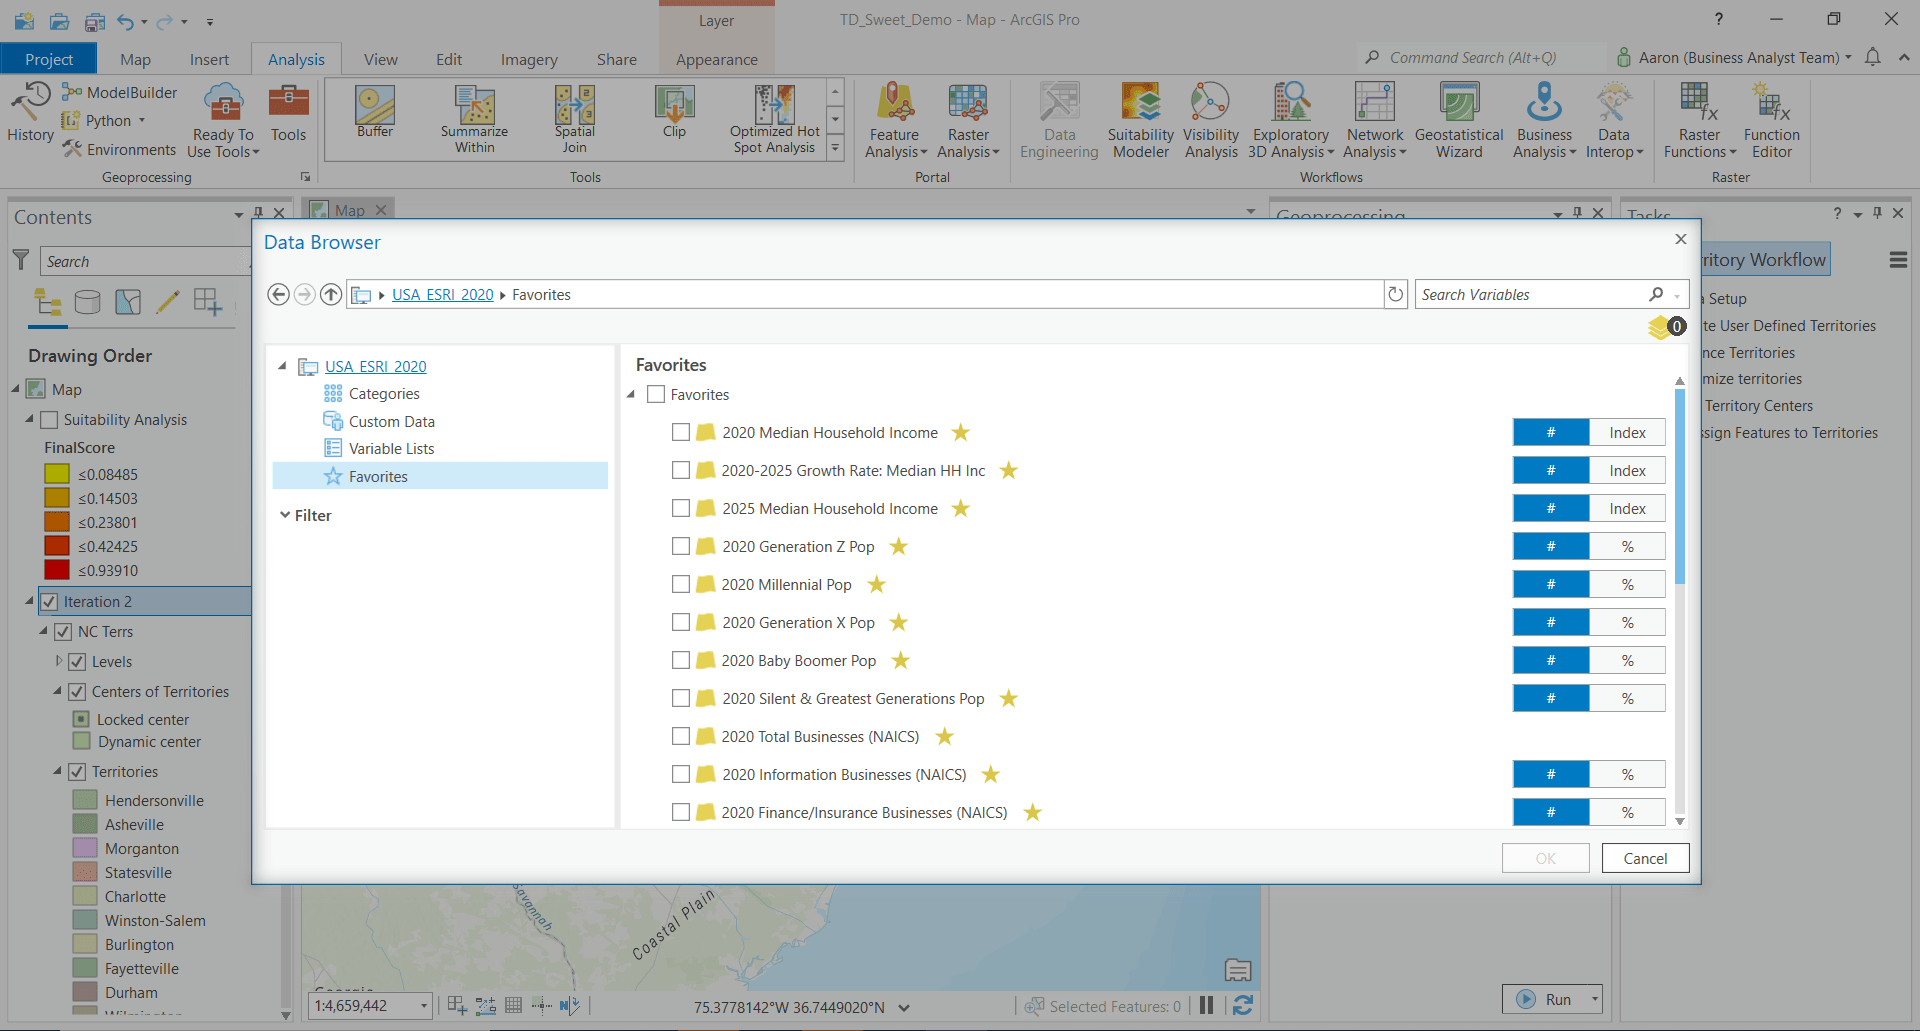 Highlighted favorites menu in the data browser within ArcGIS Business Analyst Pro